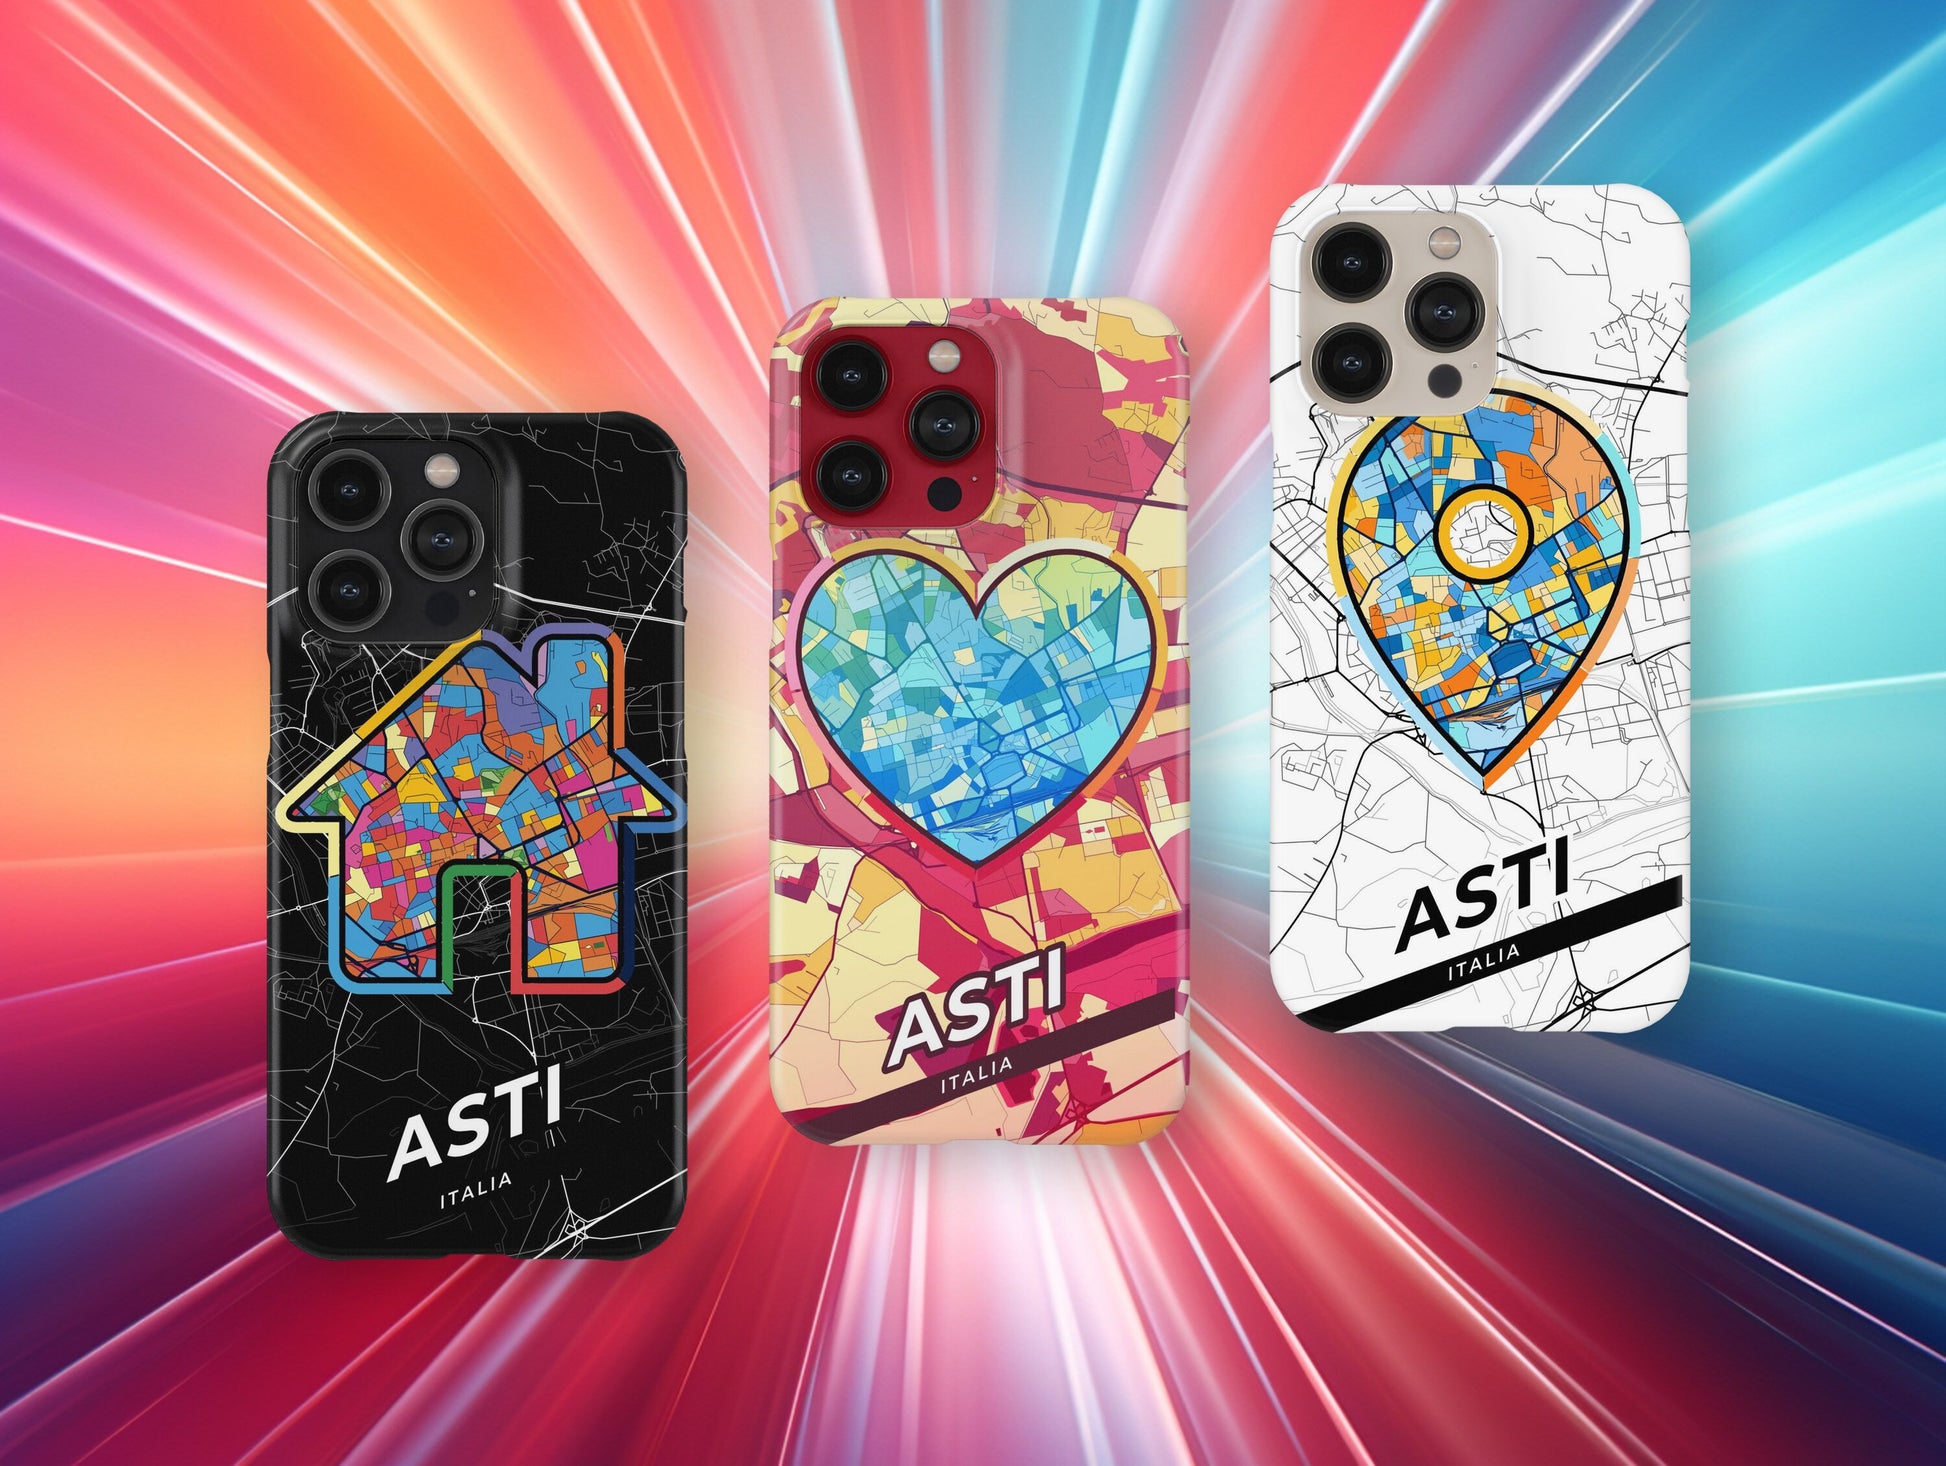 Asti Italy slim phone case with colorful icon. Birthday, wedding or housewarming gift. Couple match cases.